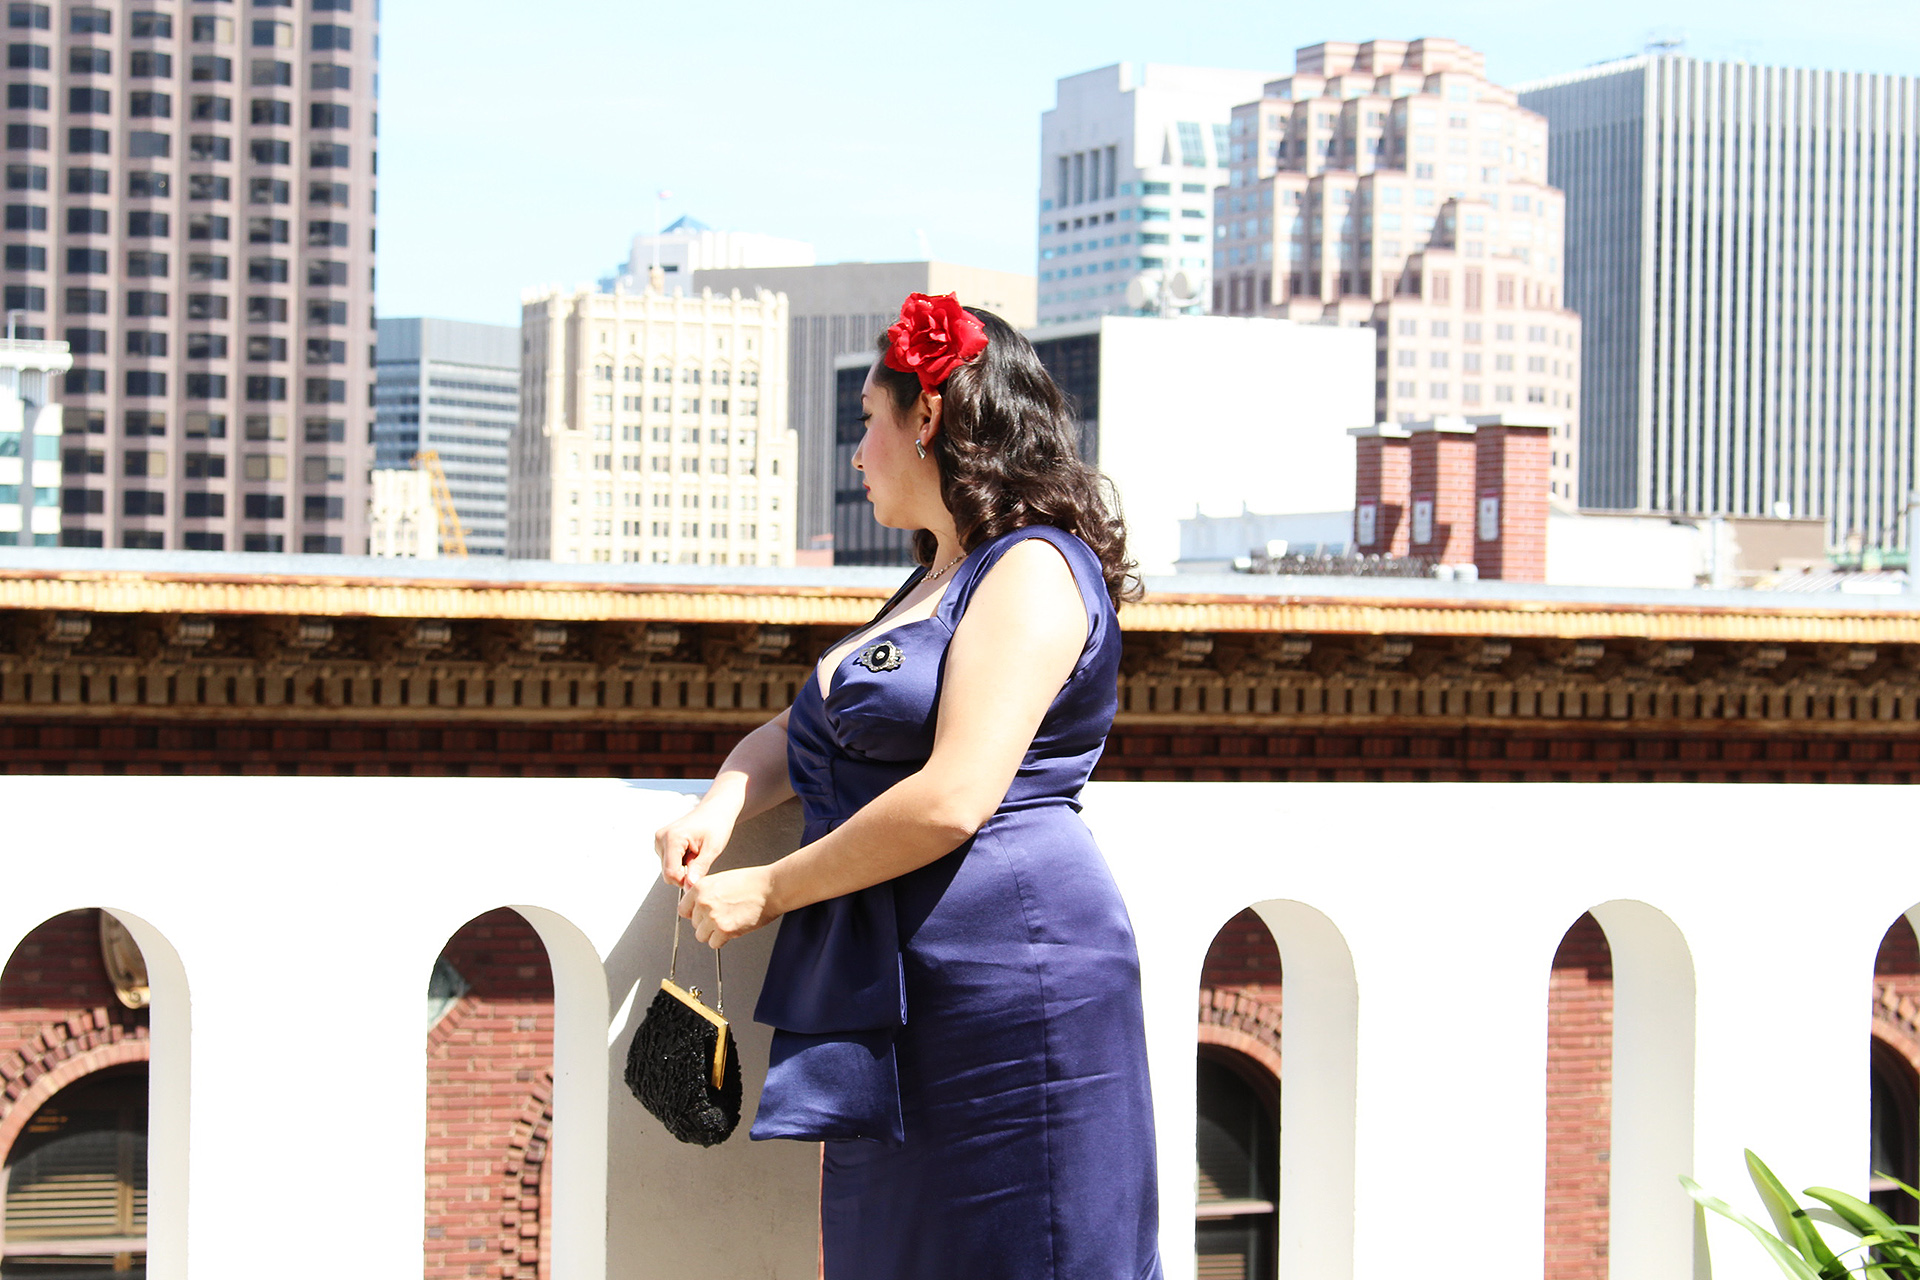 Butterick B5814, Cocktail Dress at the Fairmont Hotel in San Francisco | @vintageontap